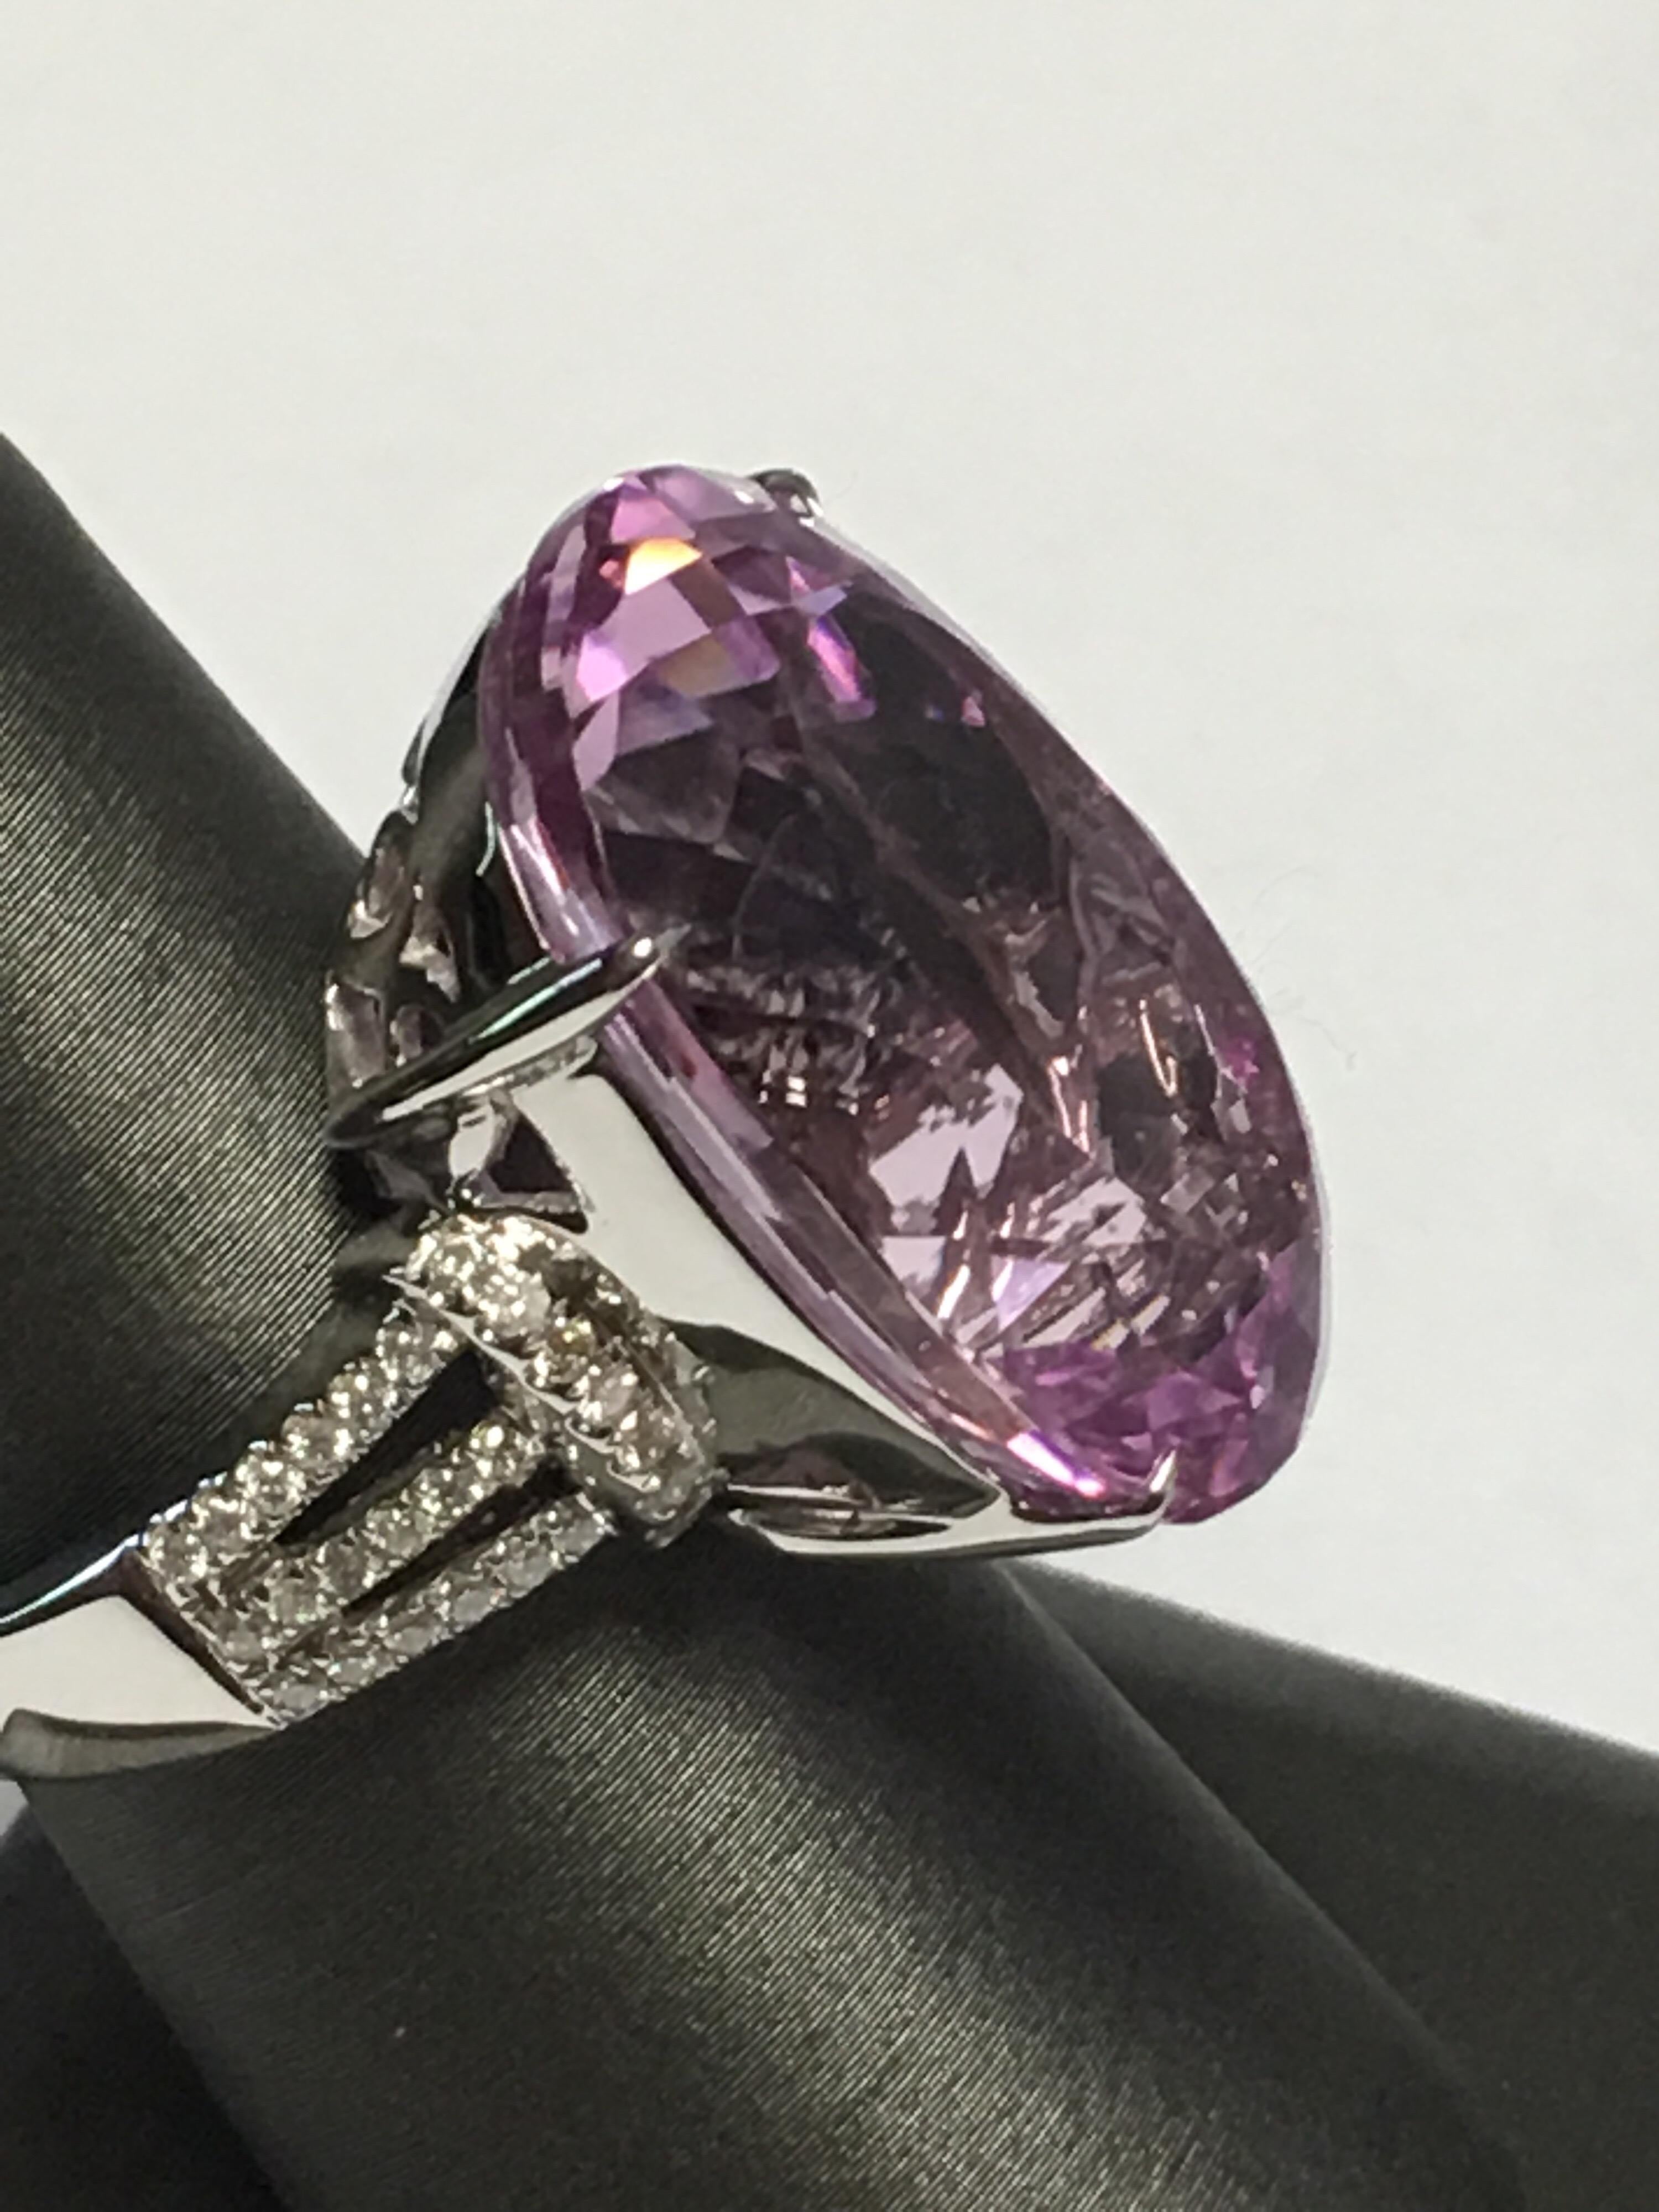 36.76 Carat  Kunzite Ring set in 14 K White gold .
Oval shape, Brilliant color.
Total gold: 8.11 gm
One of a kind handcrafted ring.
